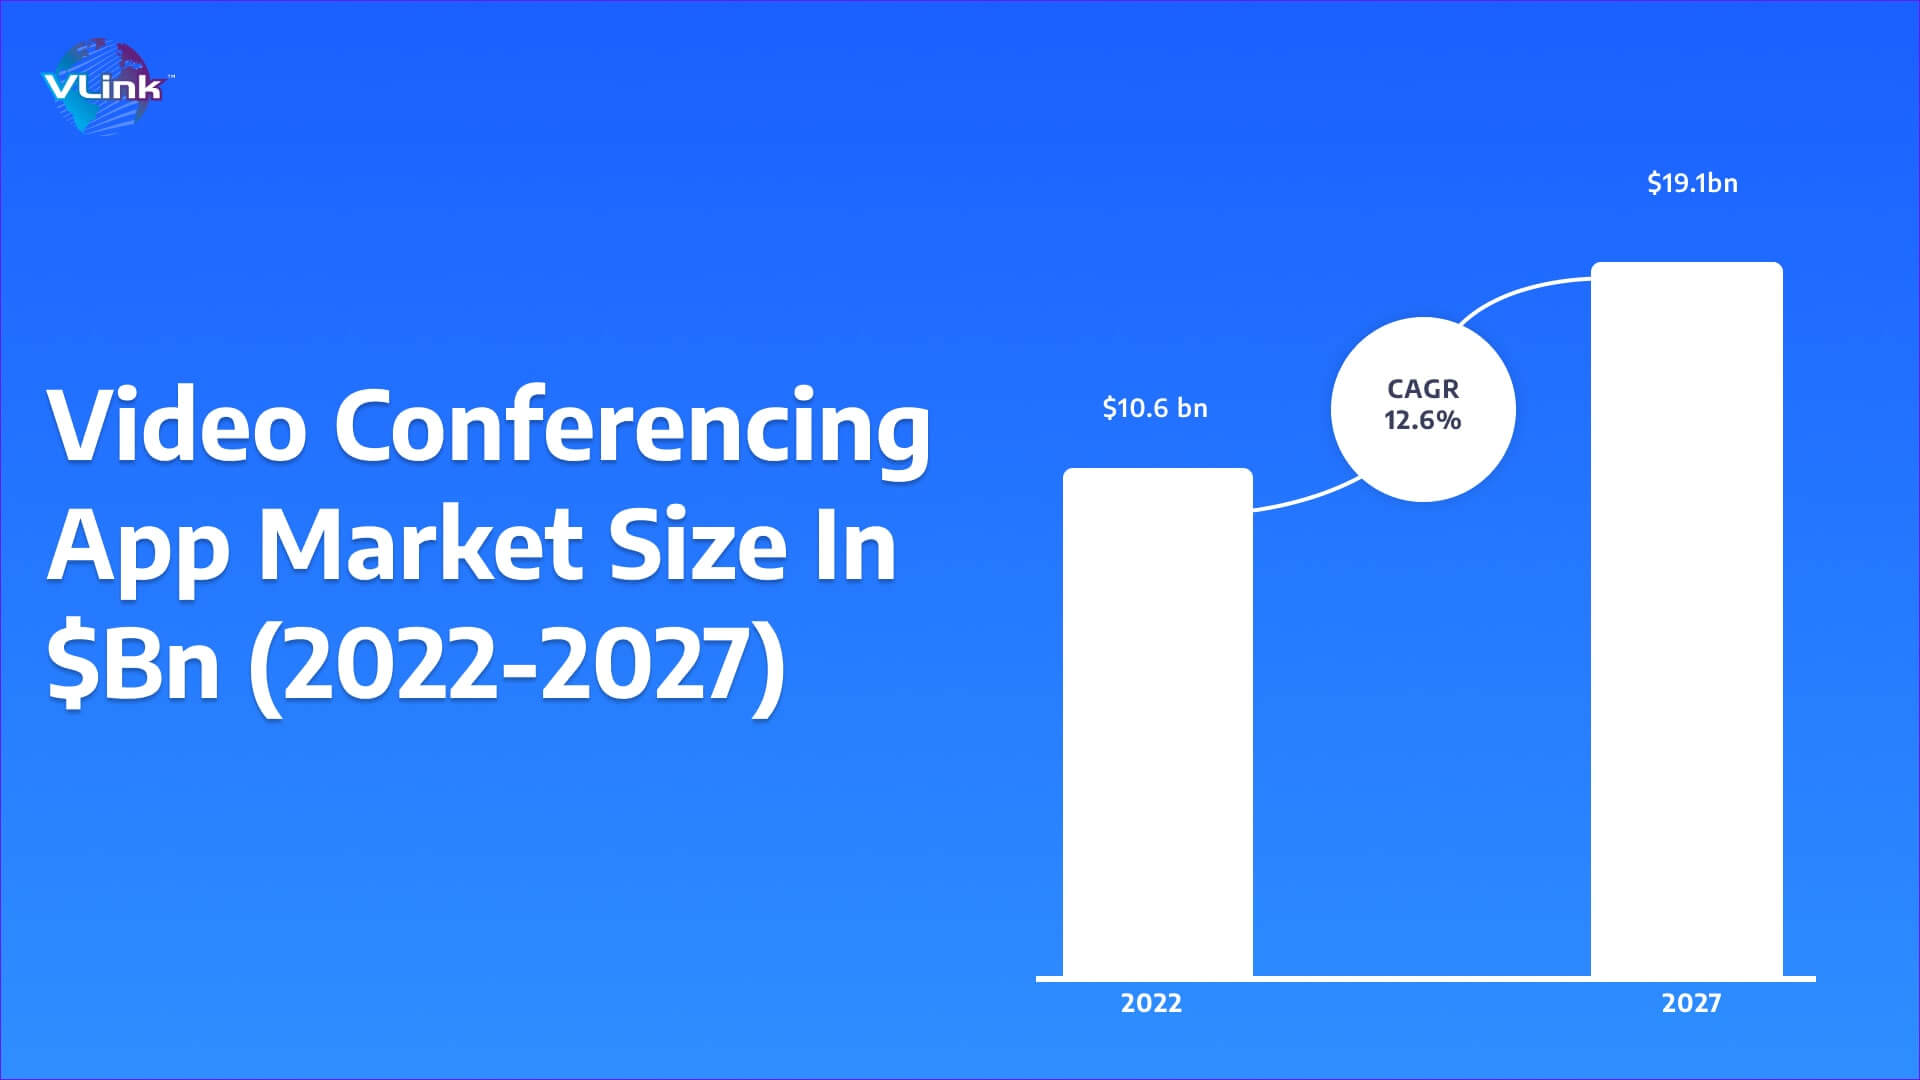 Video conferencing app market size in $bn